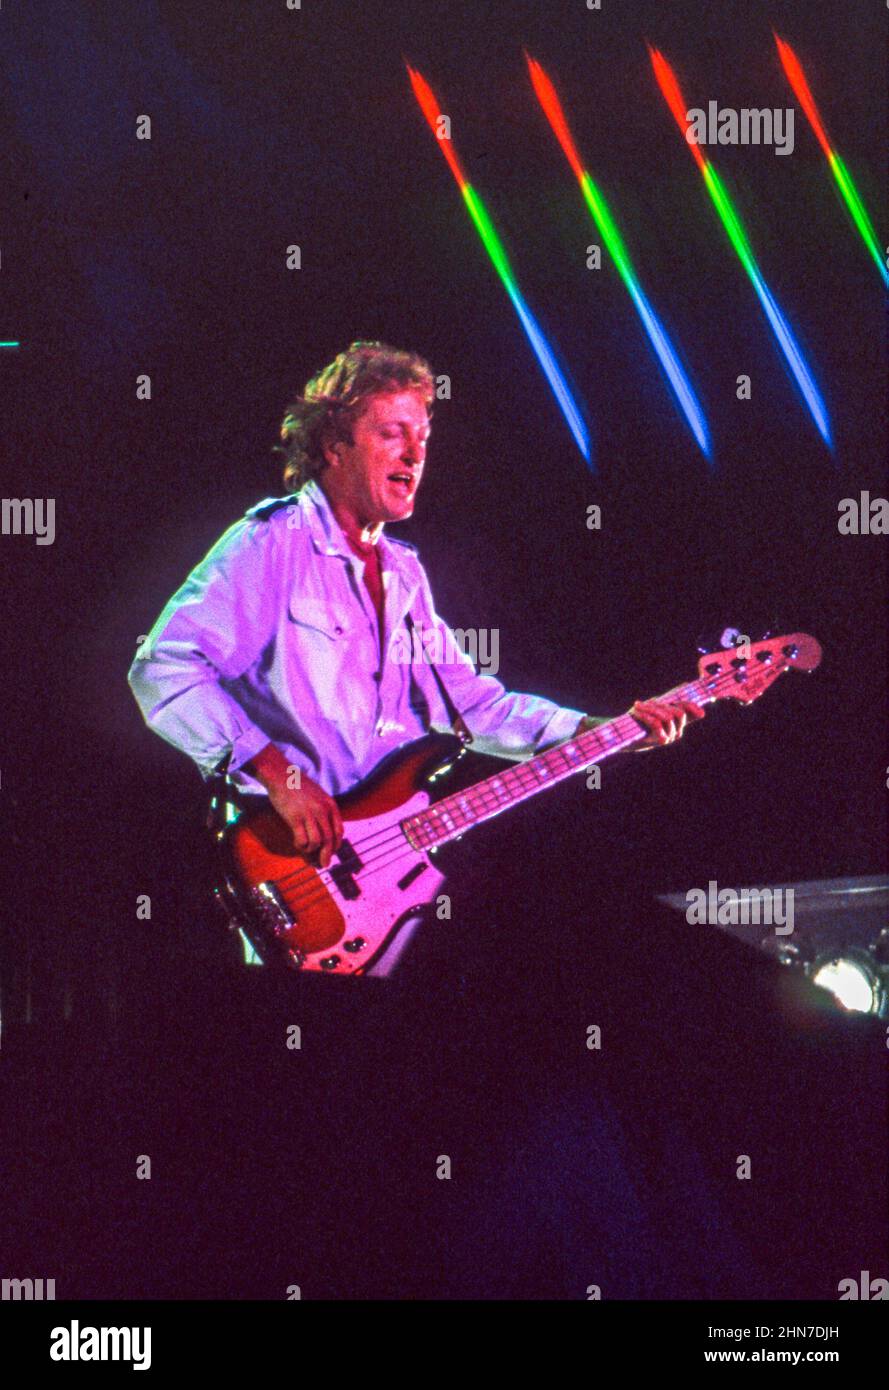 Bassist Rick Wills of Anglo-American band Foreigner performing at Wembley Arena, London in 1985. Stock Photo